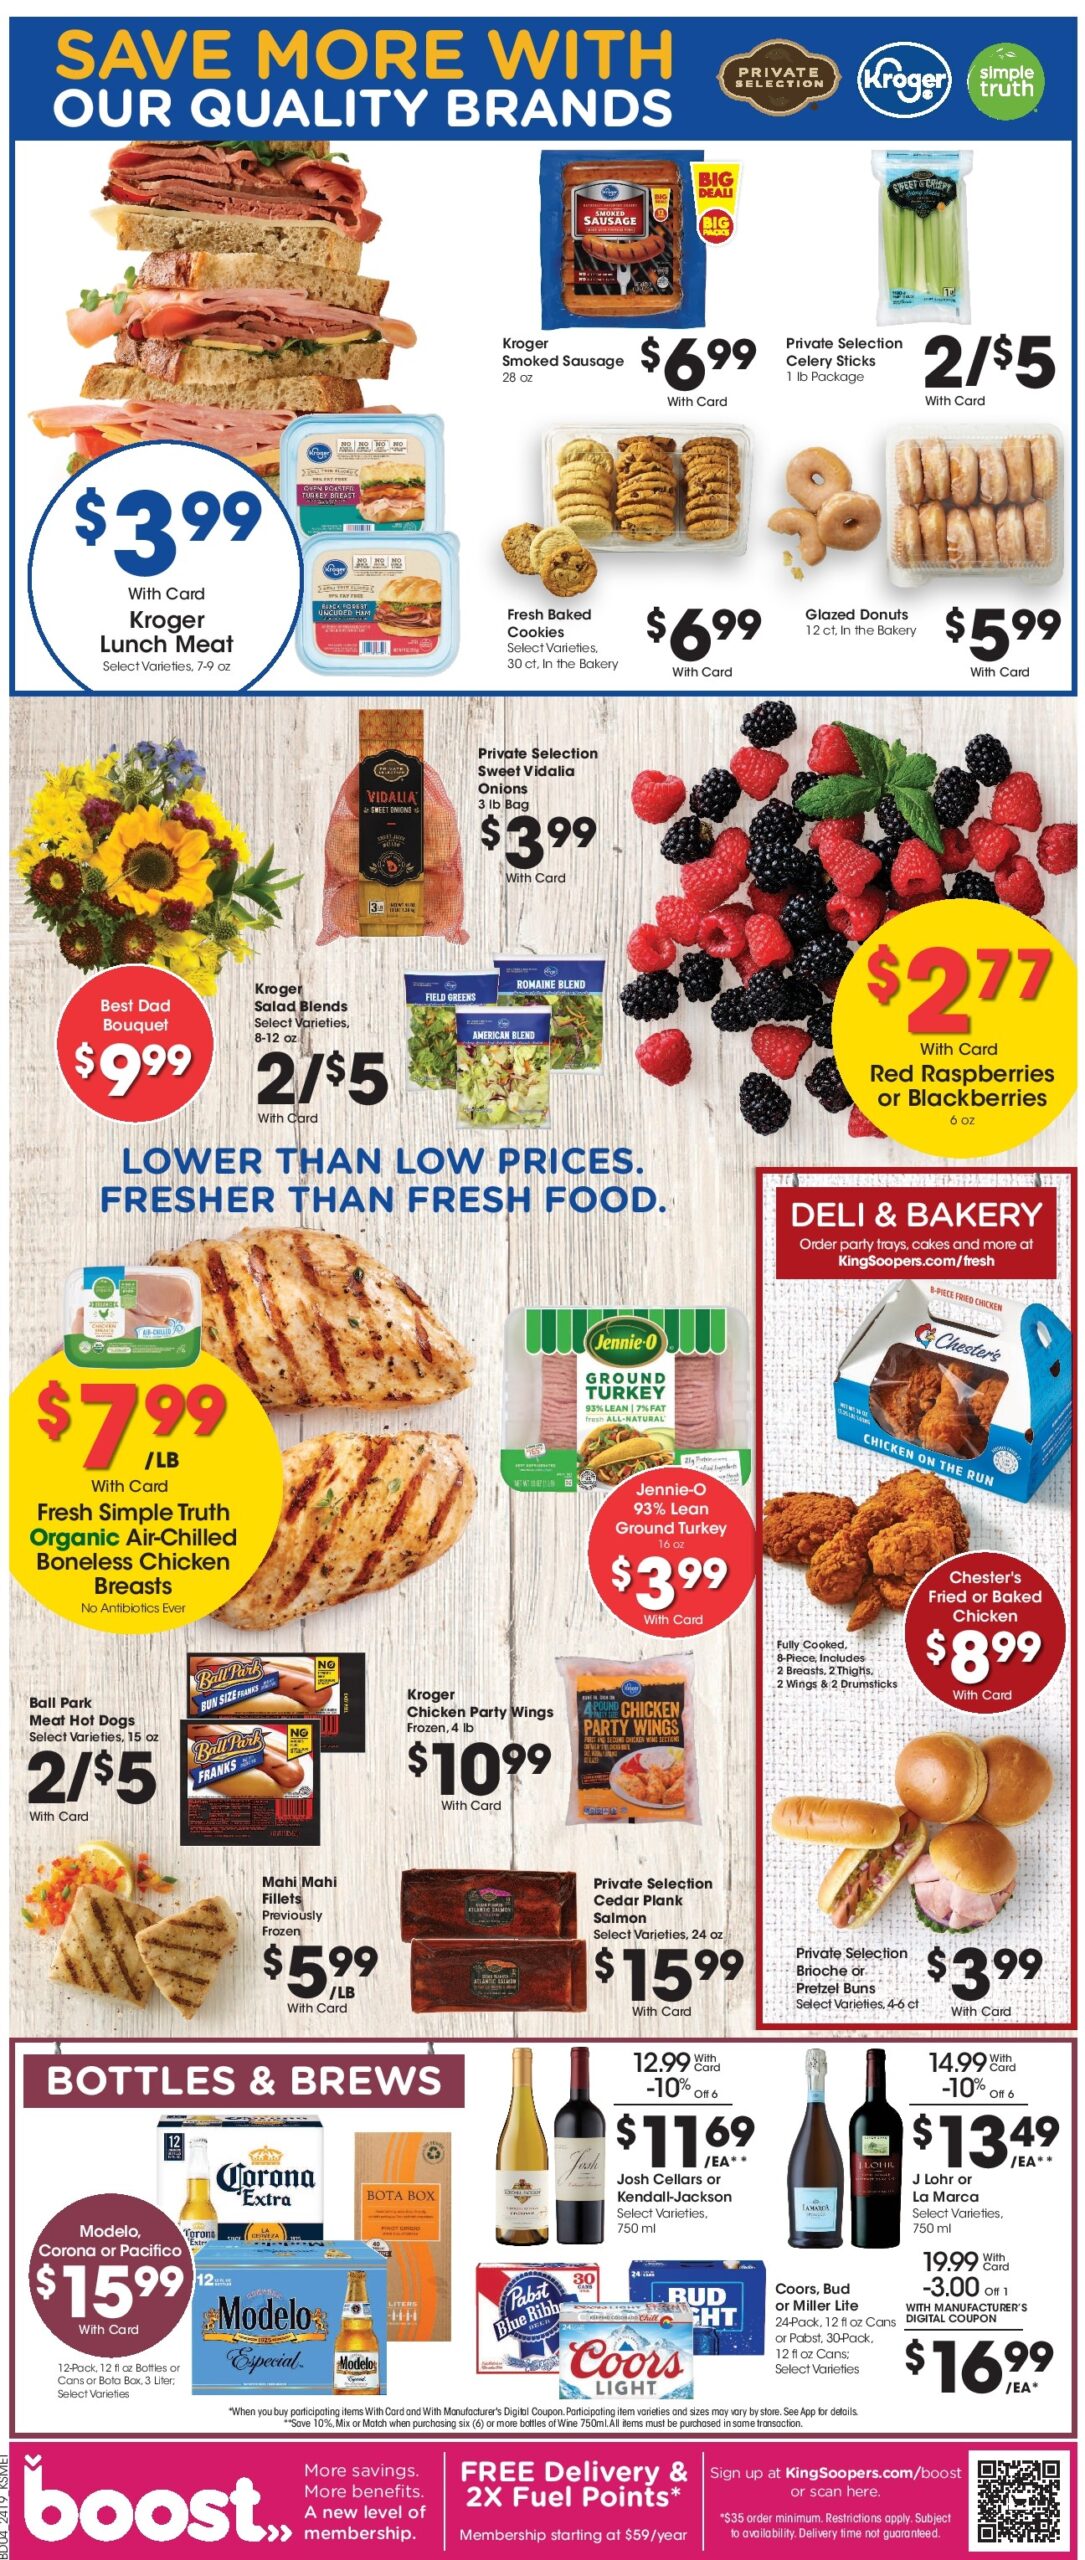 King Soopers Weekly Ad July 2024 Weekly Sales, Deals, Discounts and Digital Coupons.